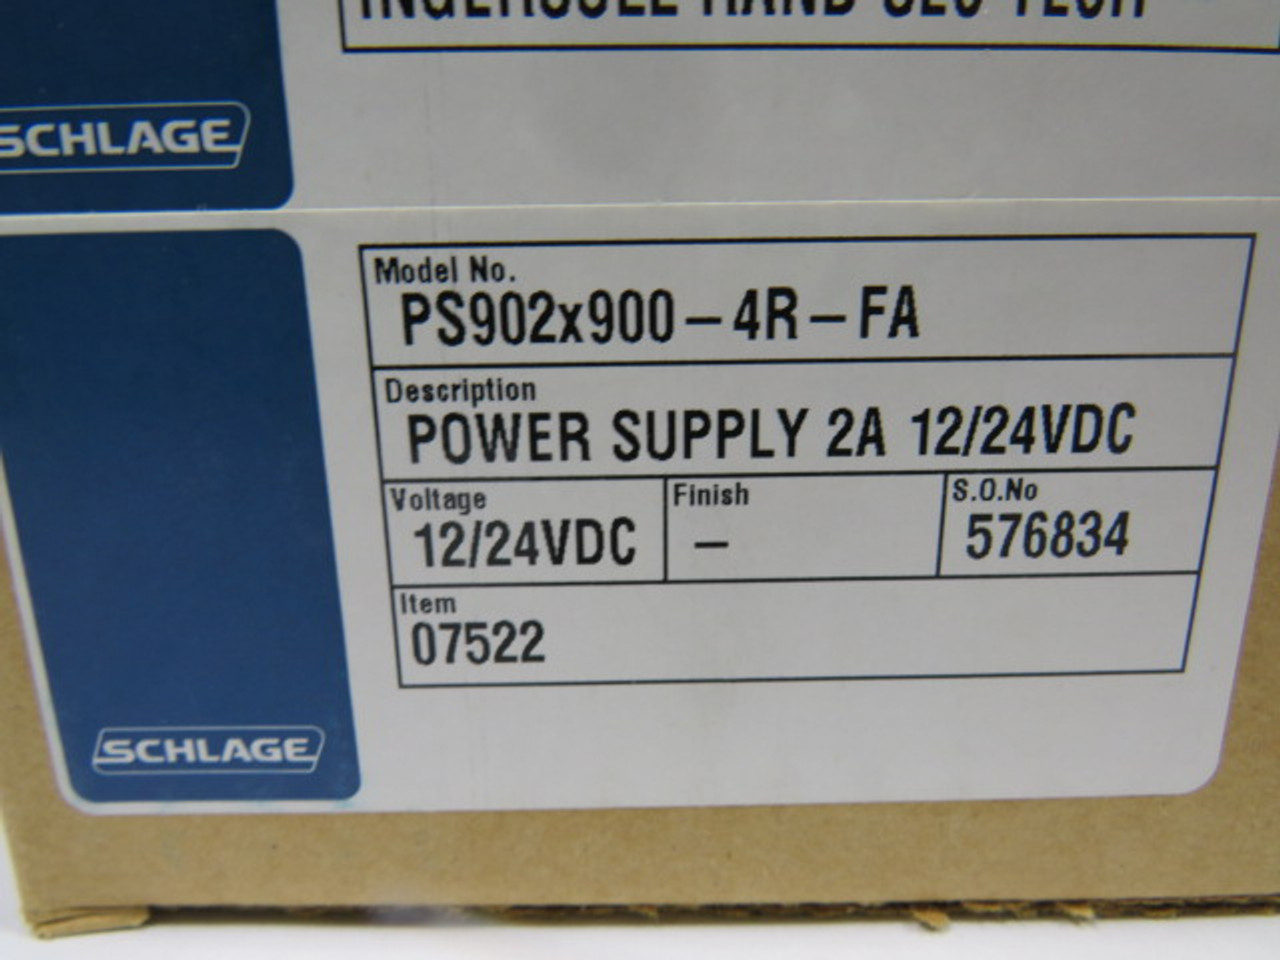 Schlage PS902X900-4R-FA Power Supply 2A 12/24Vdc ! NEW !